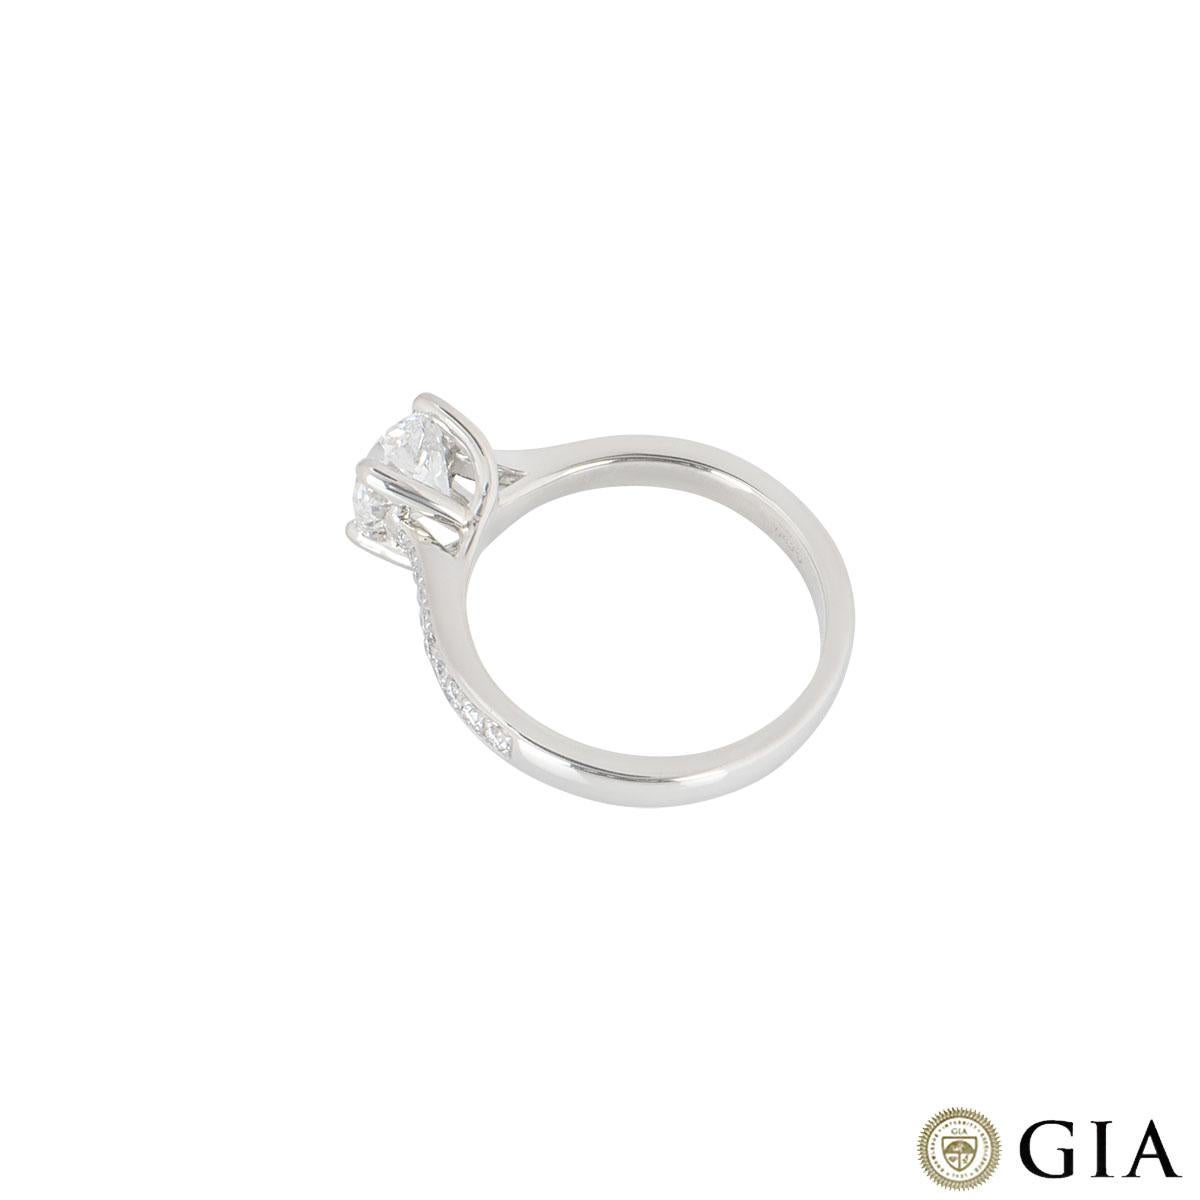 Round Cut GIA Certified Laings Platinum Diamond Solitaire Engagement Ring 1.02 Carat For Sale